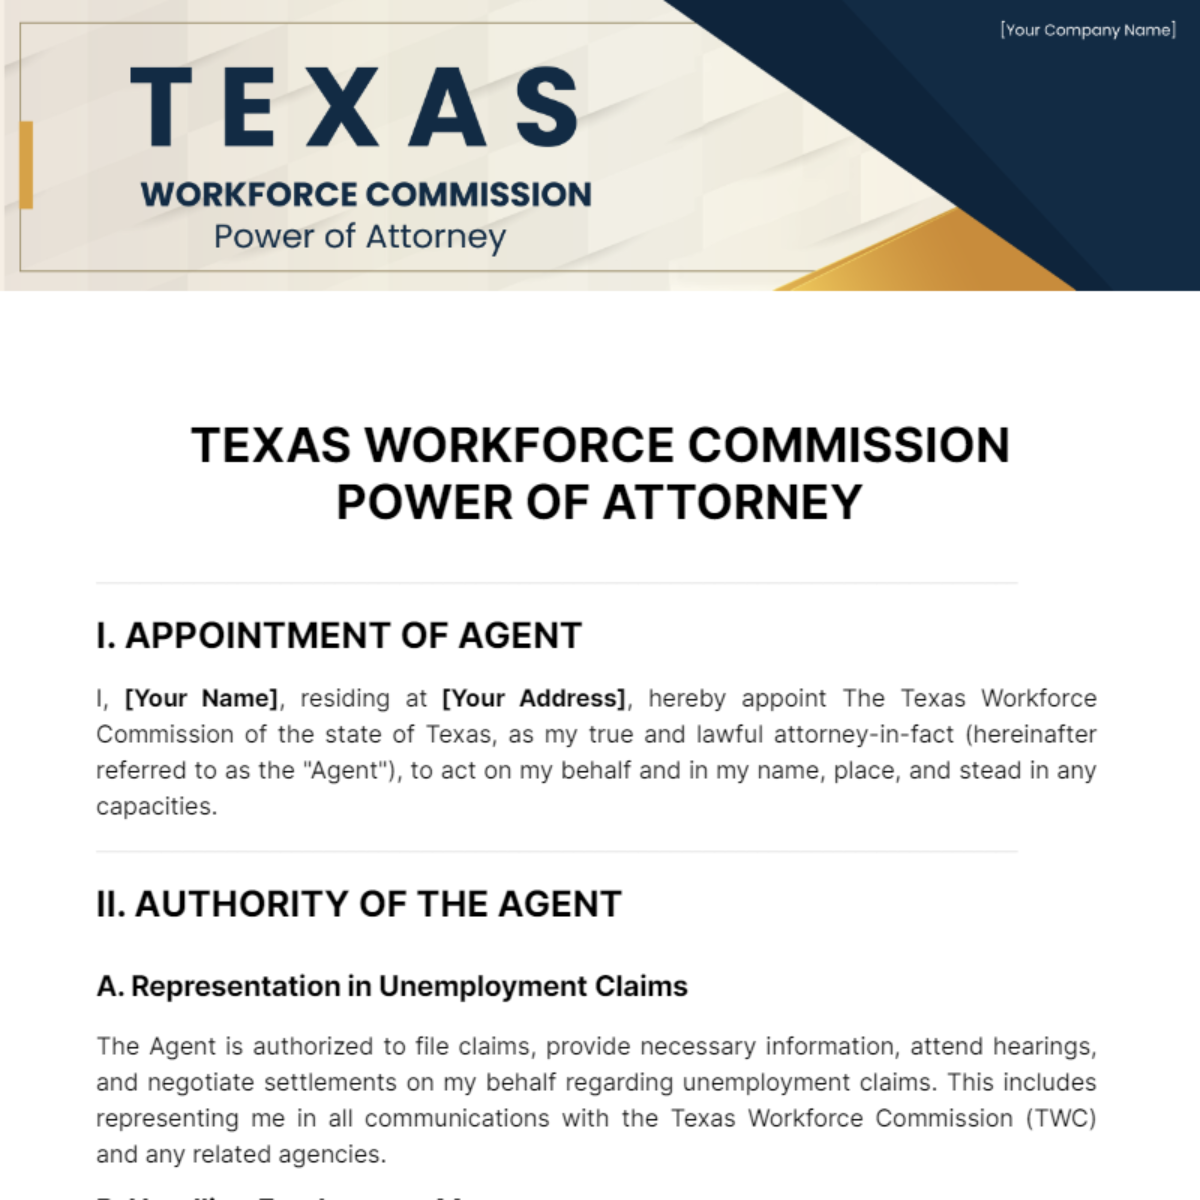 Texas Workforce Commission Power of Attorney Template